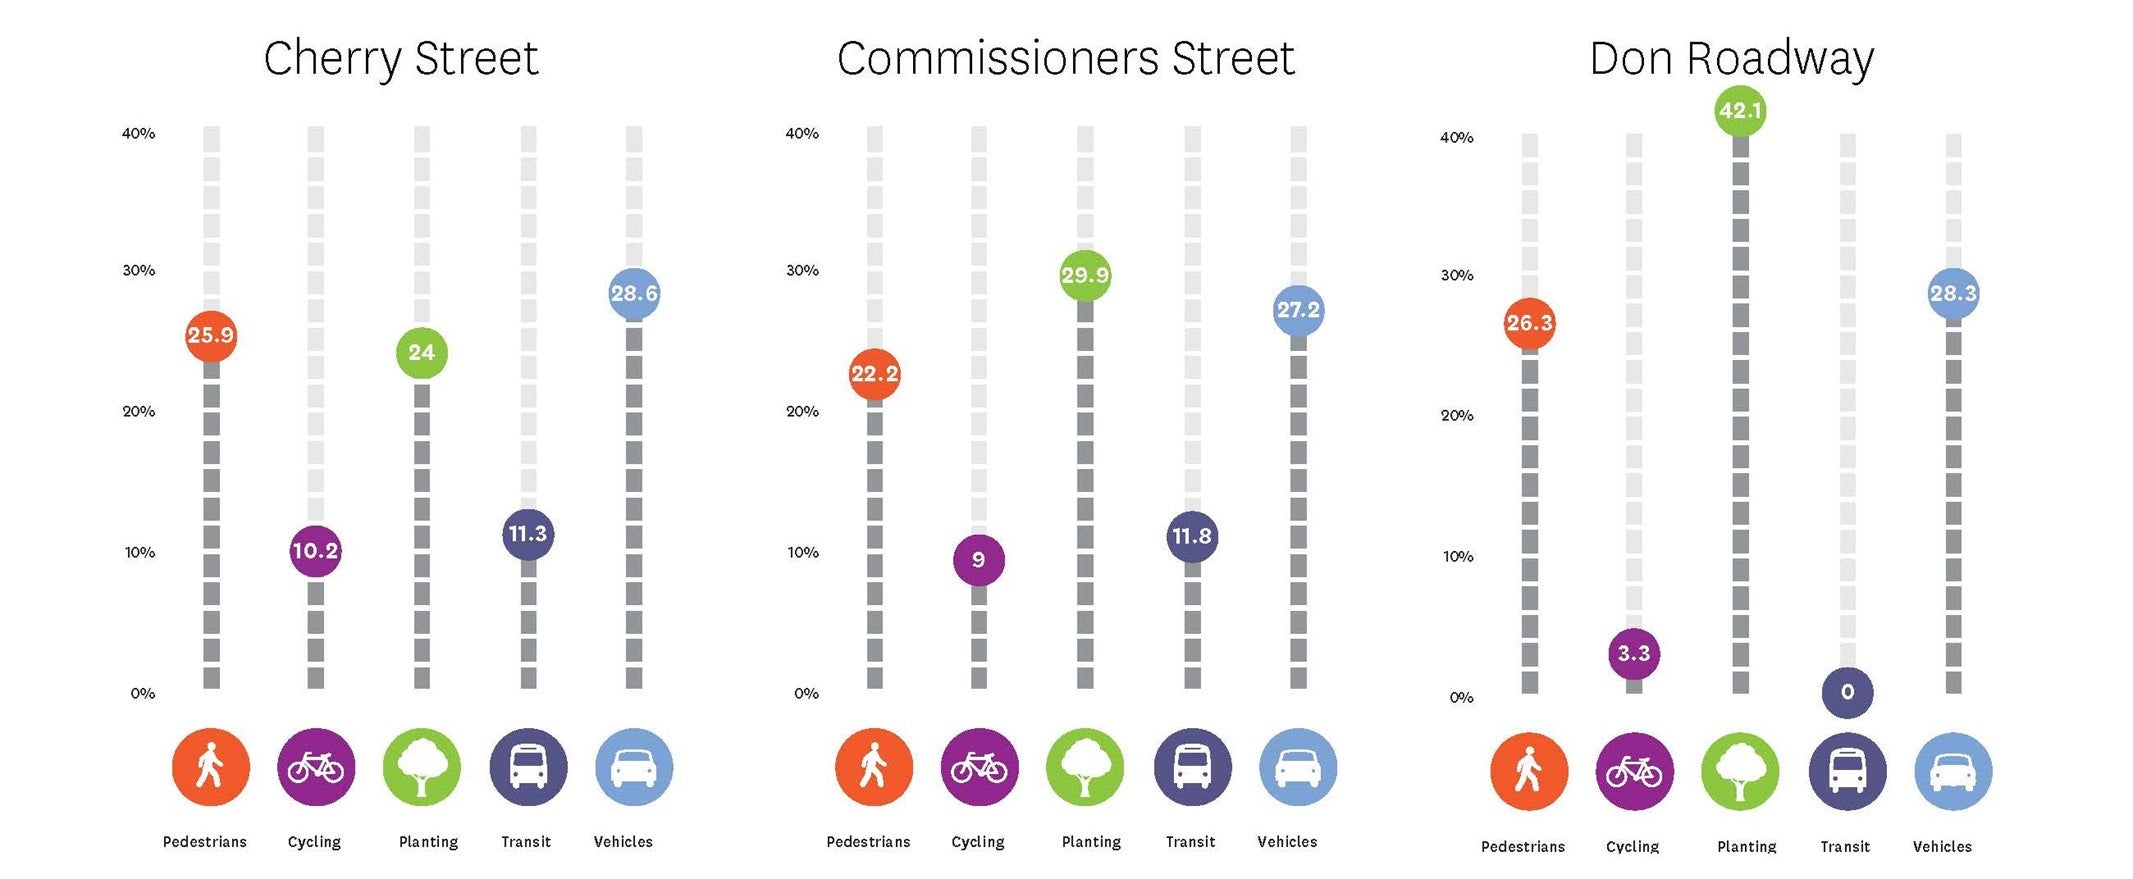 71.9% of space on Cherry Street, Commissioners Street and the Don Roadway is allocated to non-passenger auto use